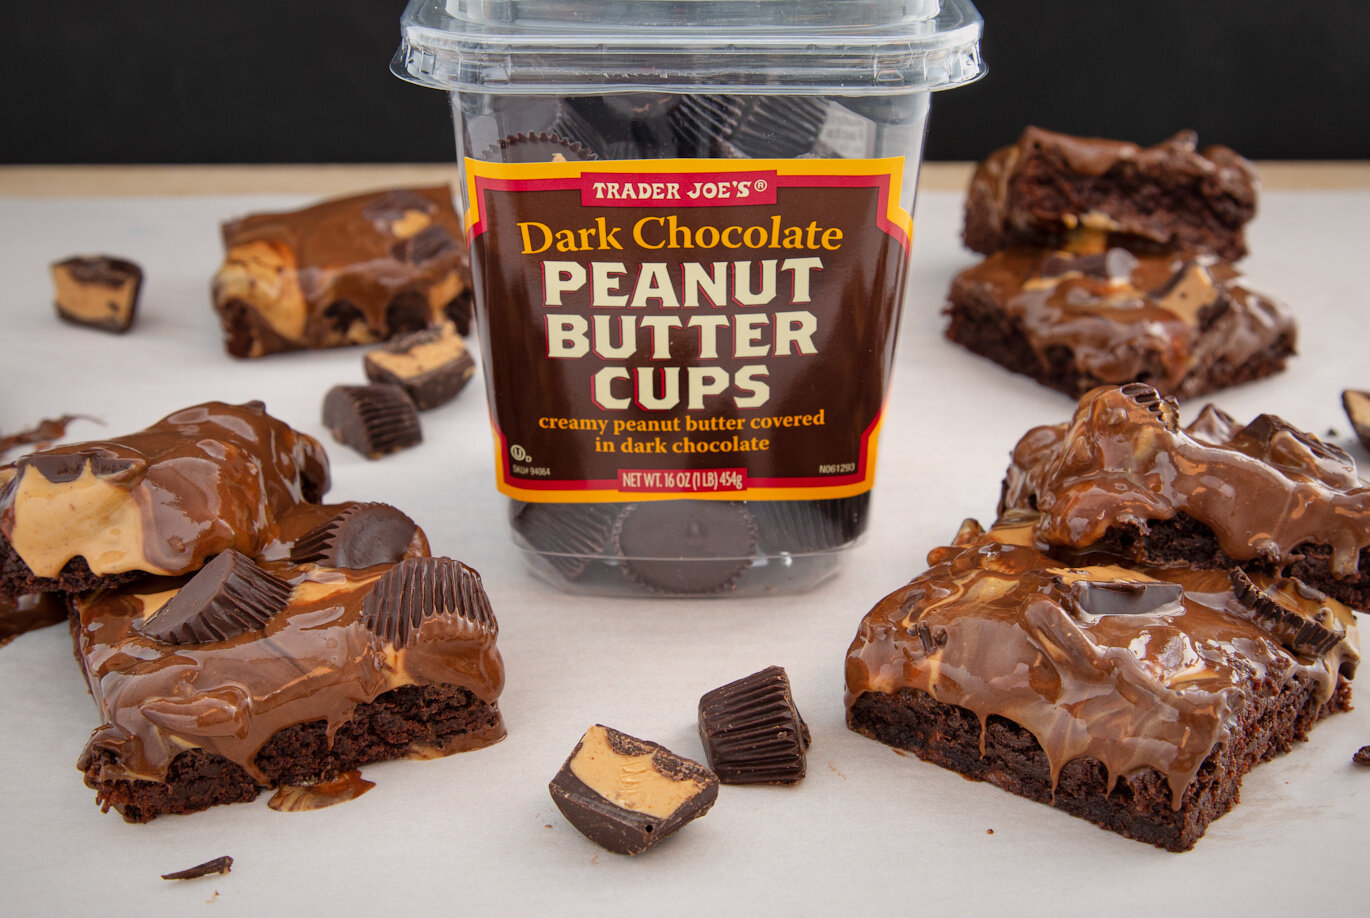 Trader Joe's Dark Choclate Peanut Butter Cups in recipe with chocolate truffle brownie mix; peanut butter cups melting off the tops of the brownies